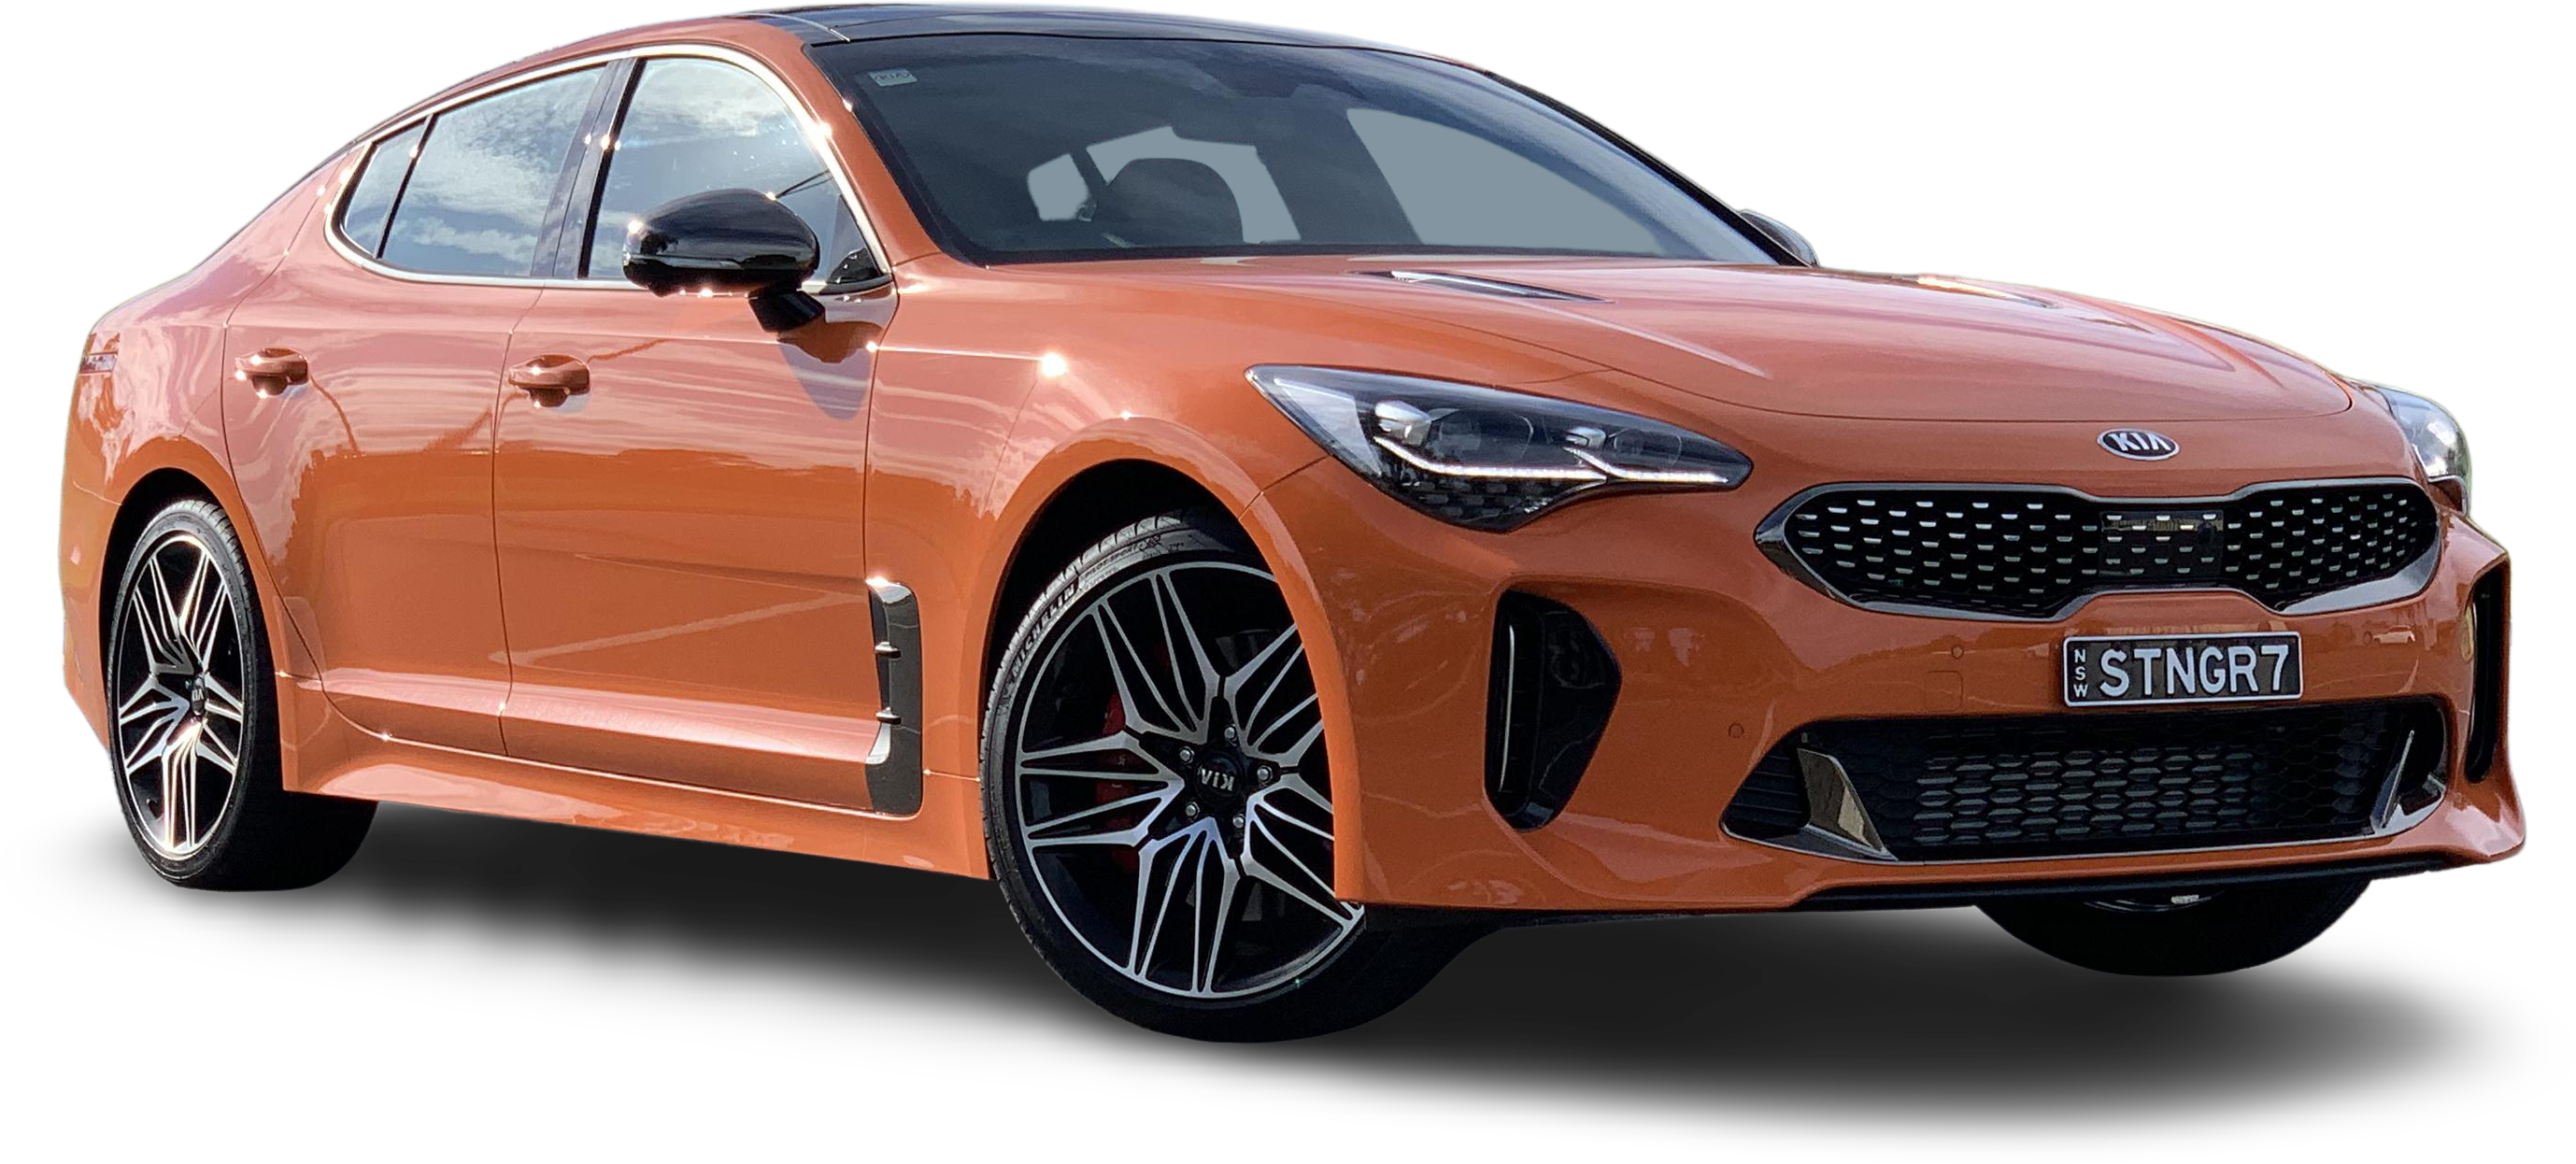 Kia Stinger Review Price And Specification Carexpert